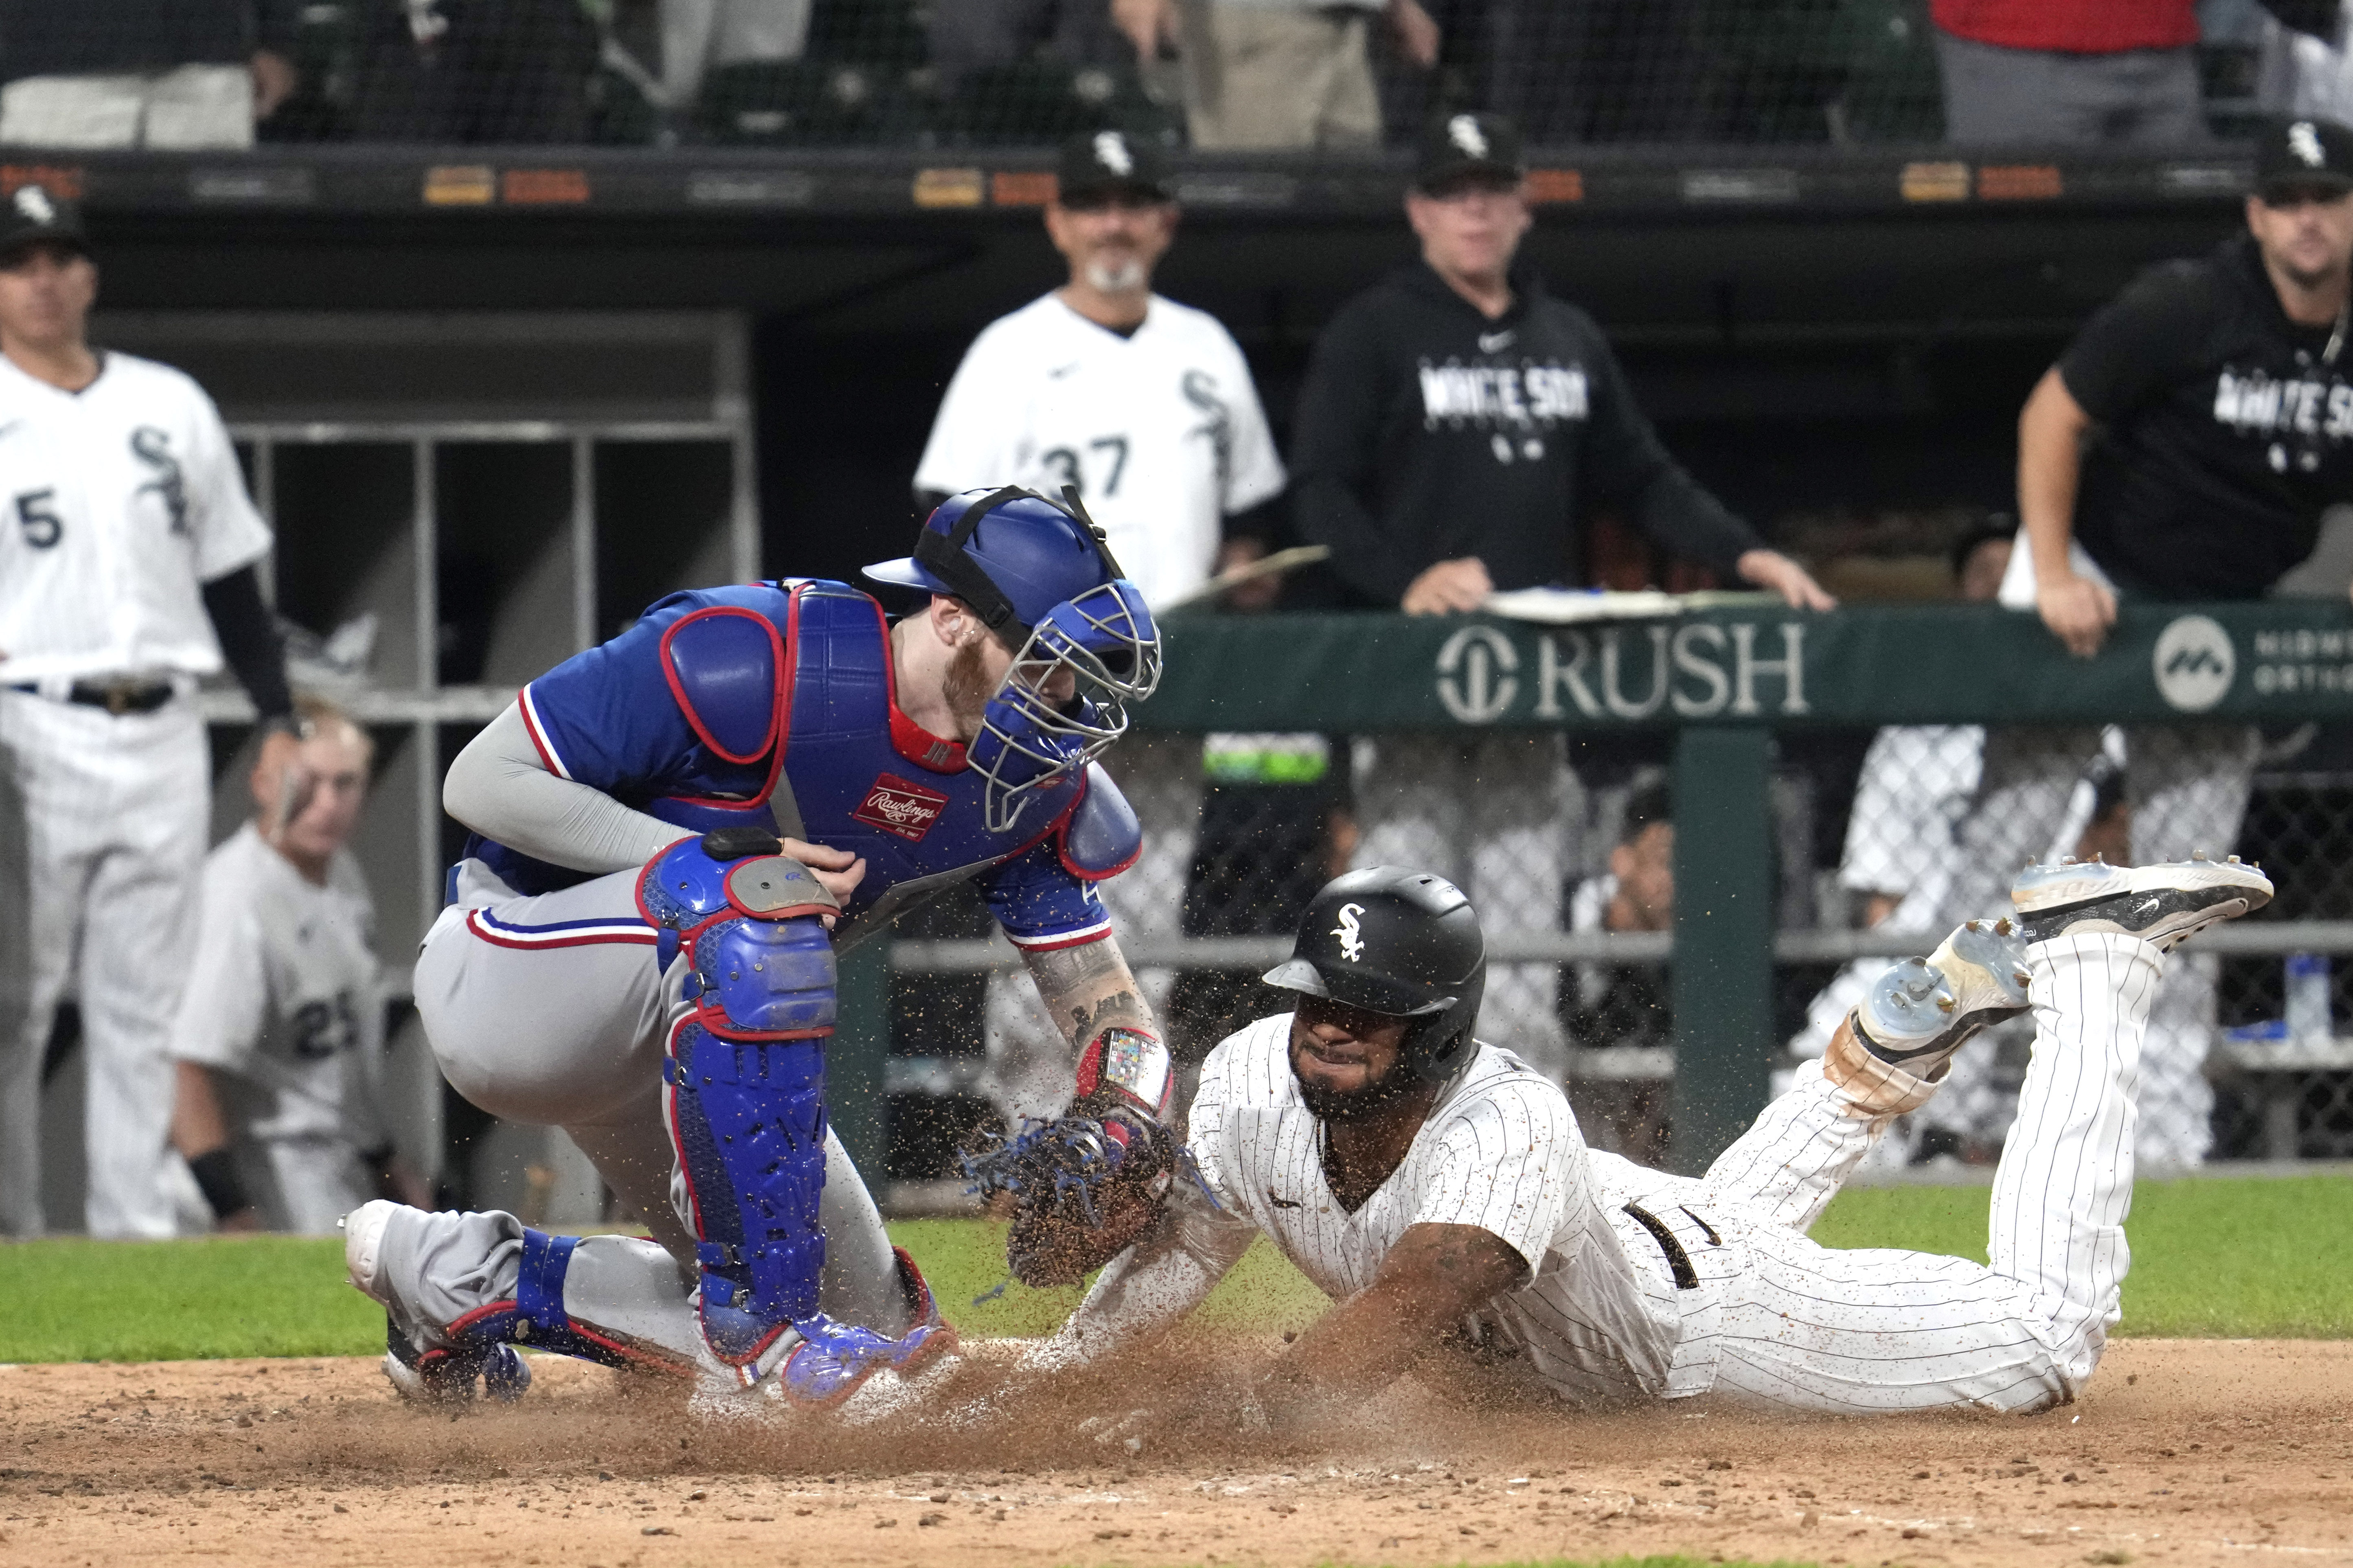 Chicago White Sox  Find Major League Baseball Games, Events & Field Info